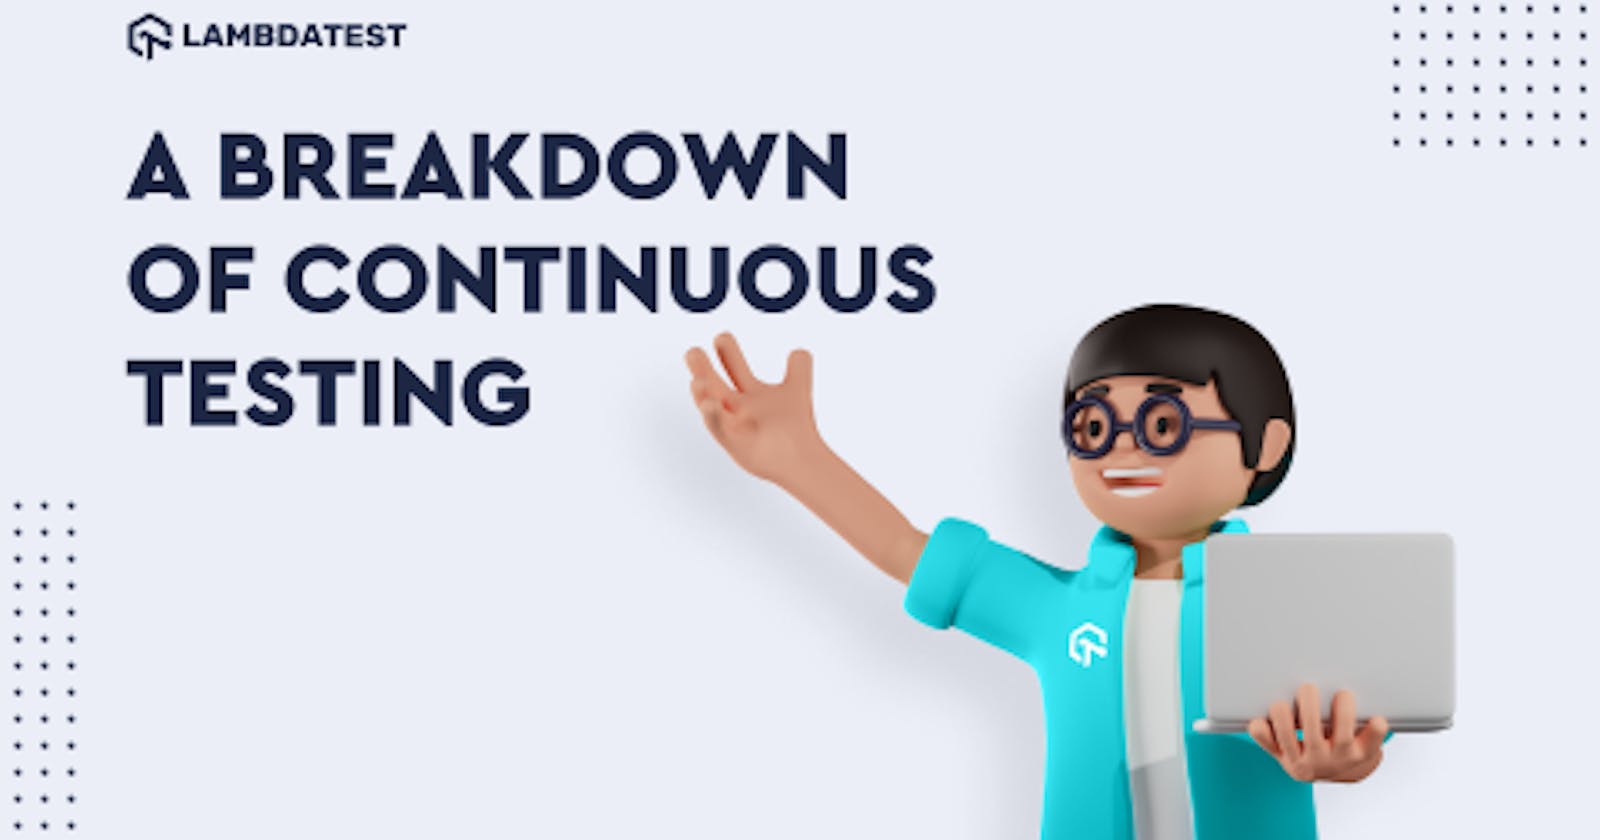 A Breakdown of Continuous Testing